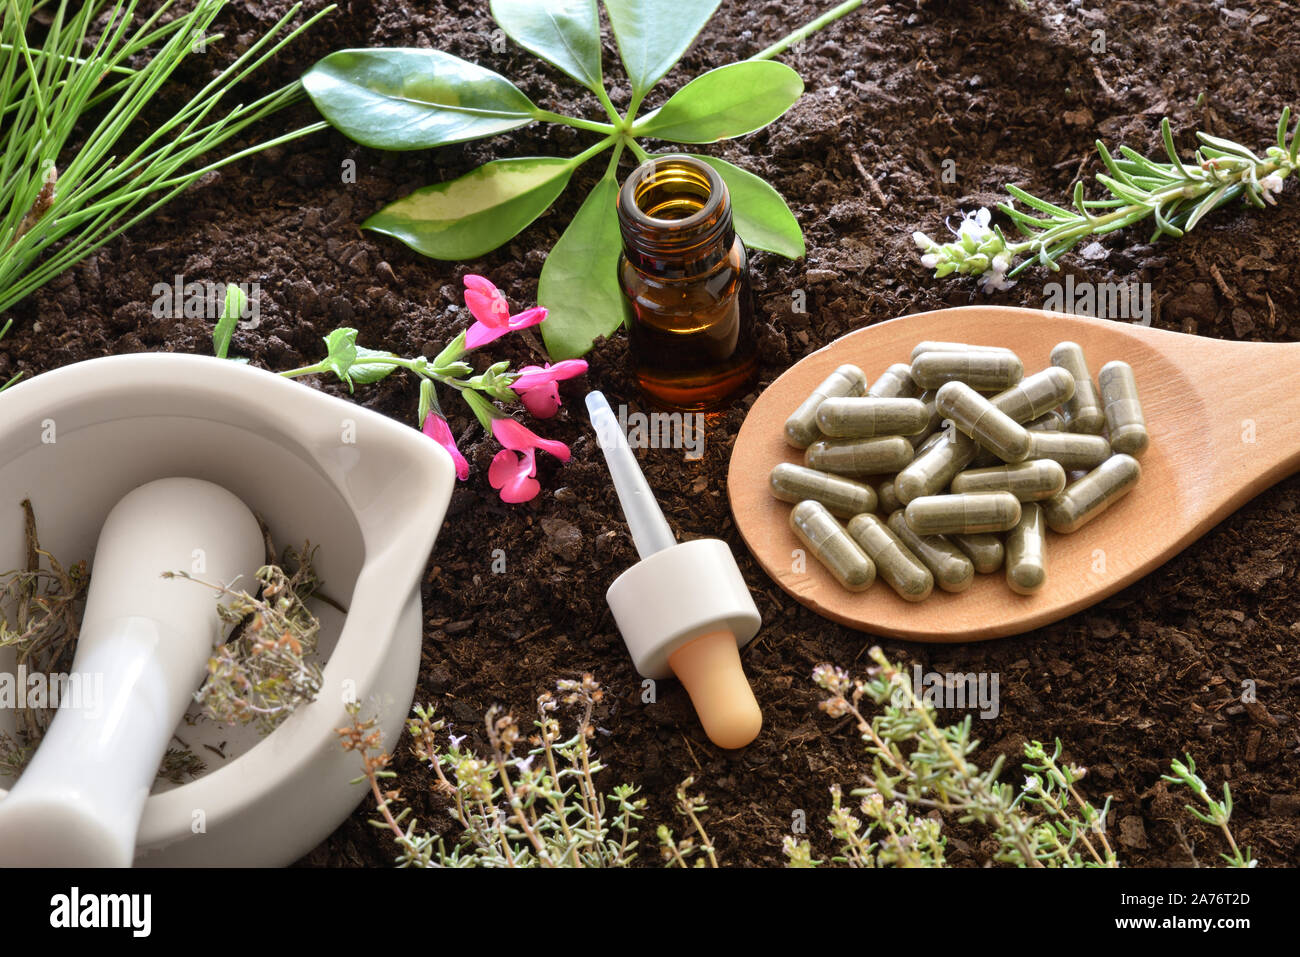 Preparation of natural plant medicine with mortar, wooden spoon with capsules, dropper bottle and plants on soil. Alternative natural medicine concept Stock Photo